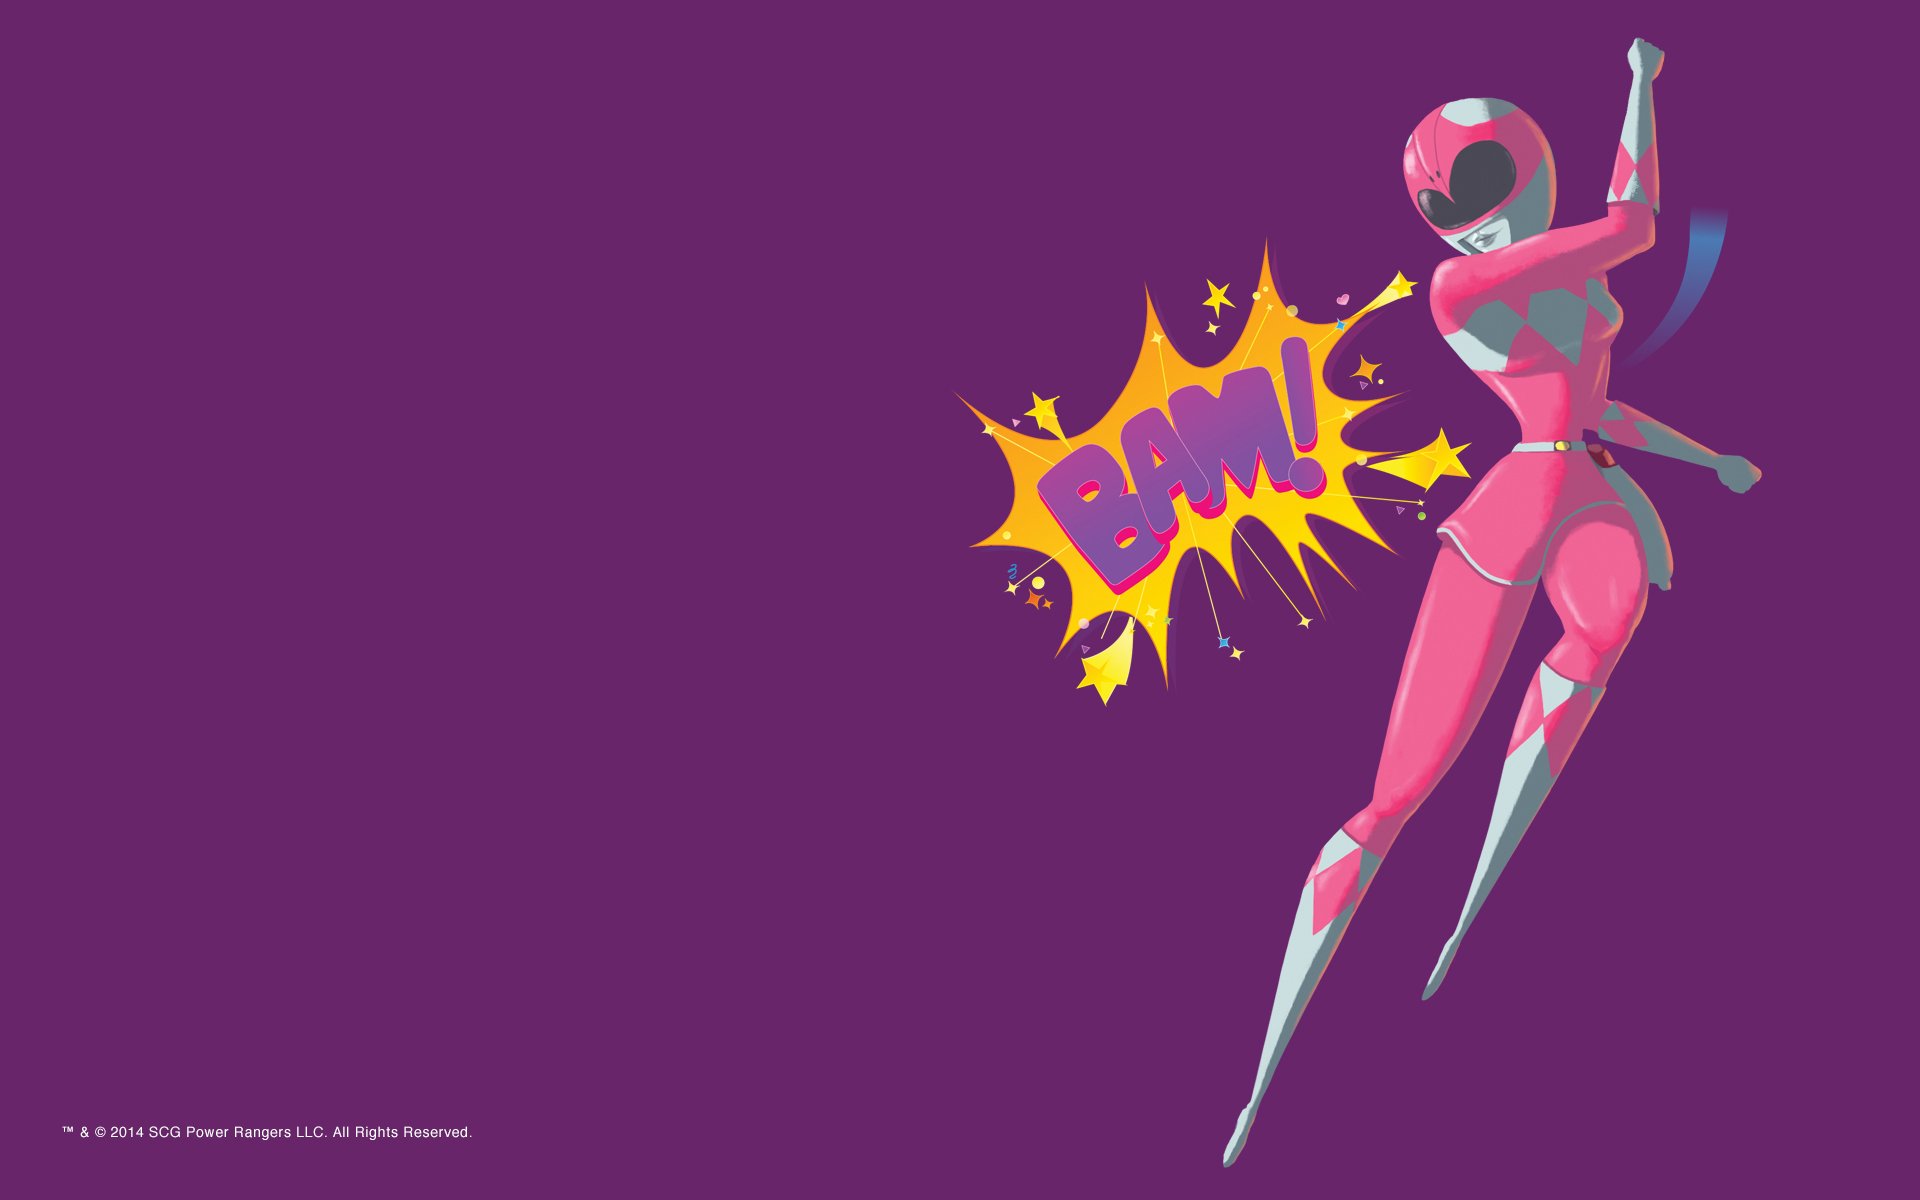 Its Morphin Time With These Power Rangers Wallpapers